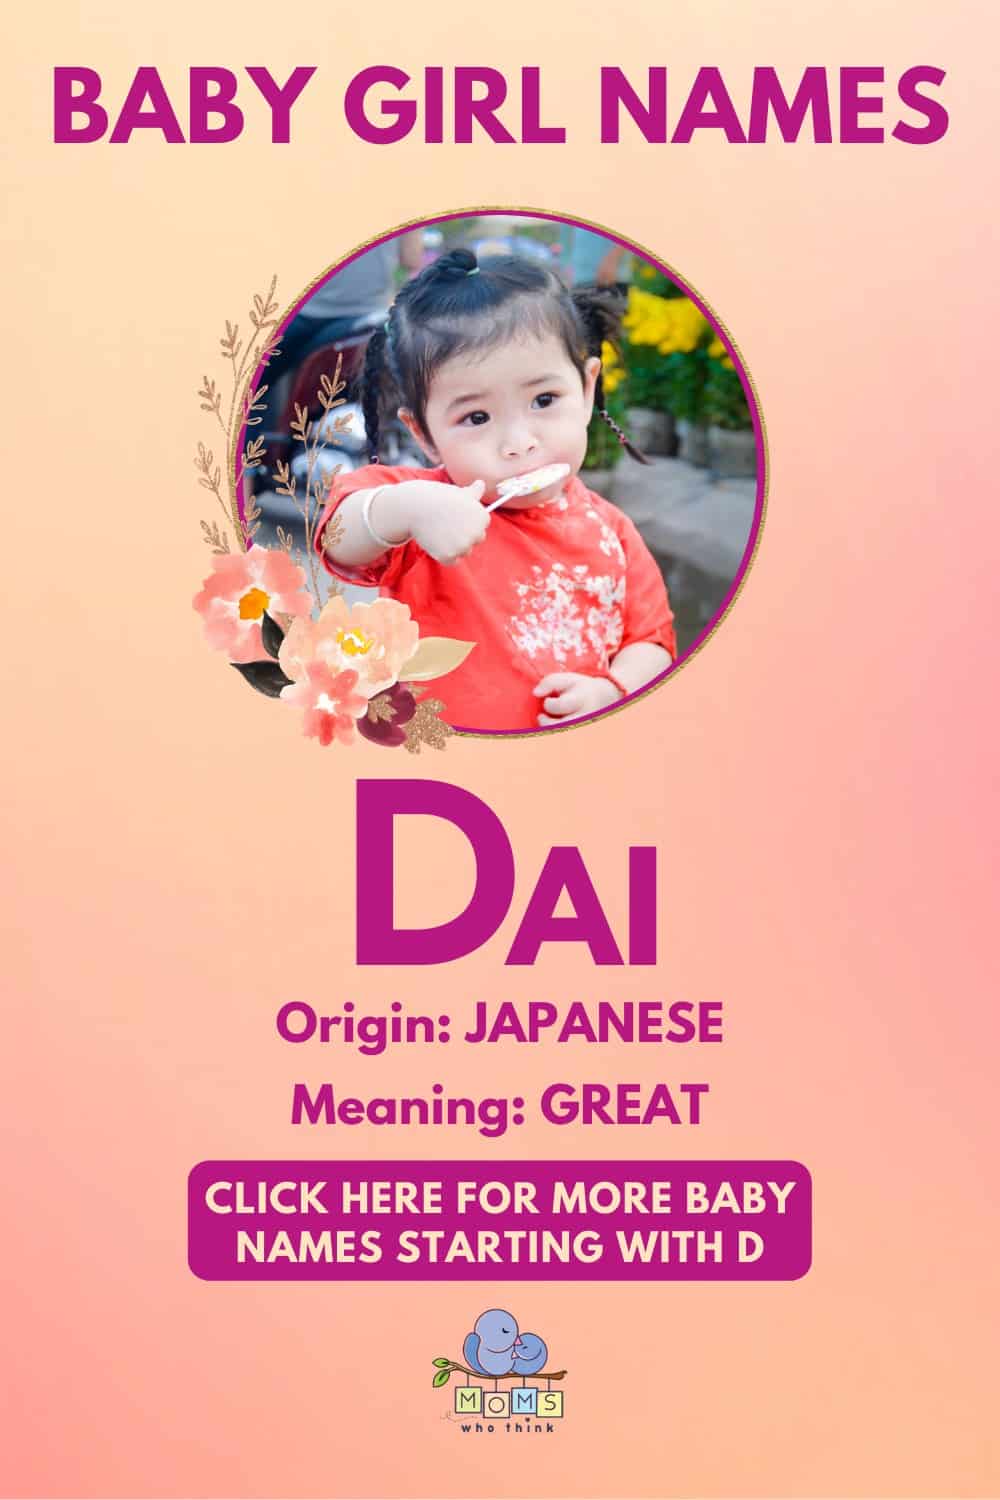 Baby girl name meanings - Dai